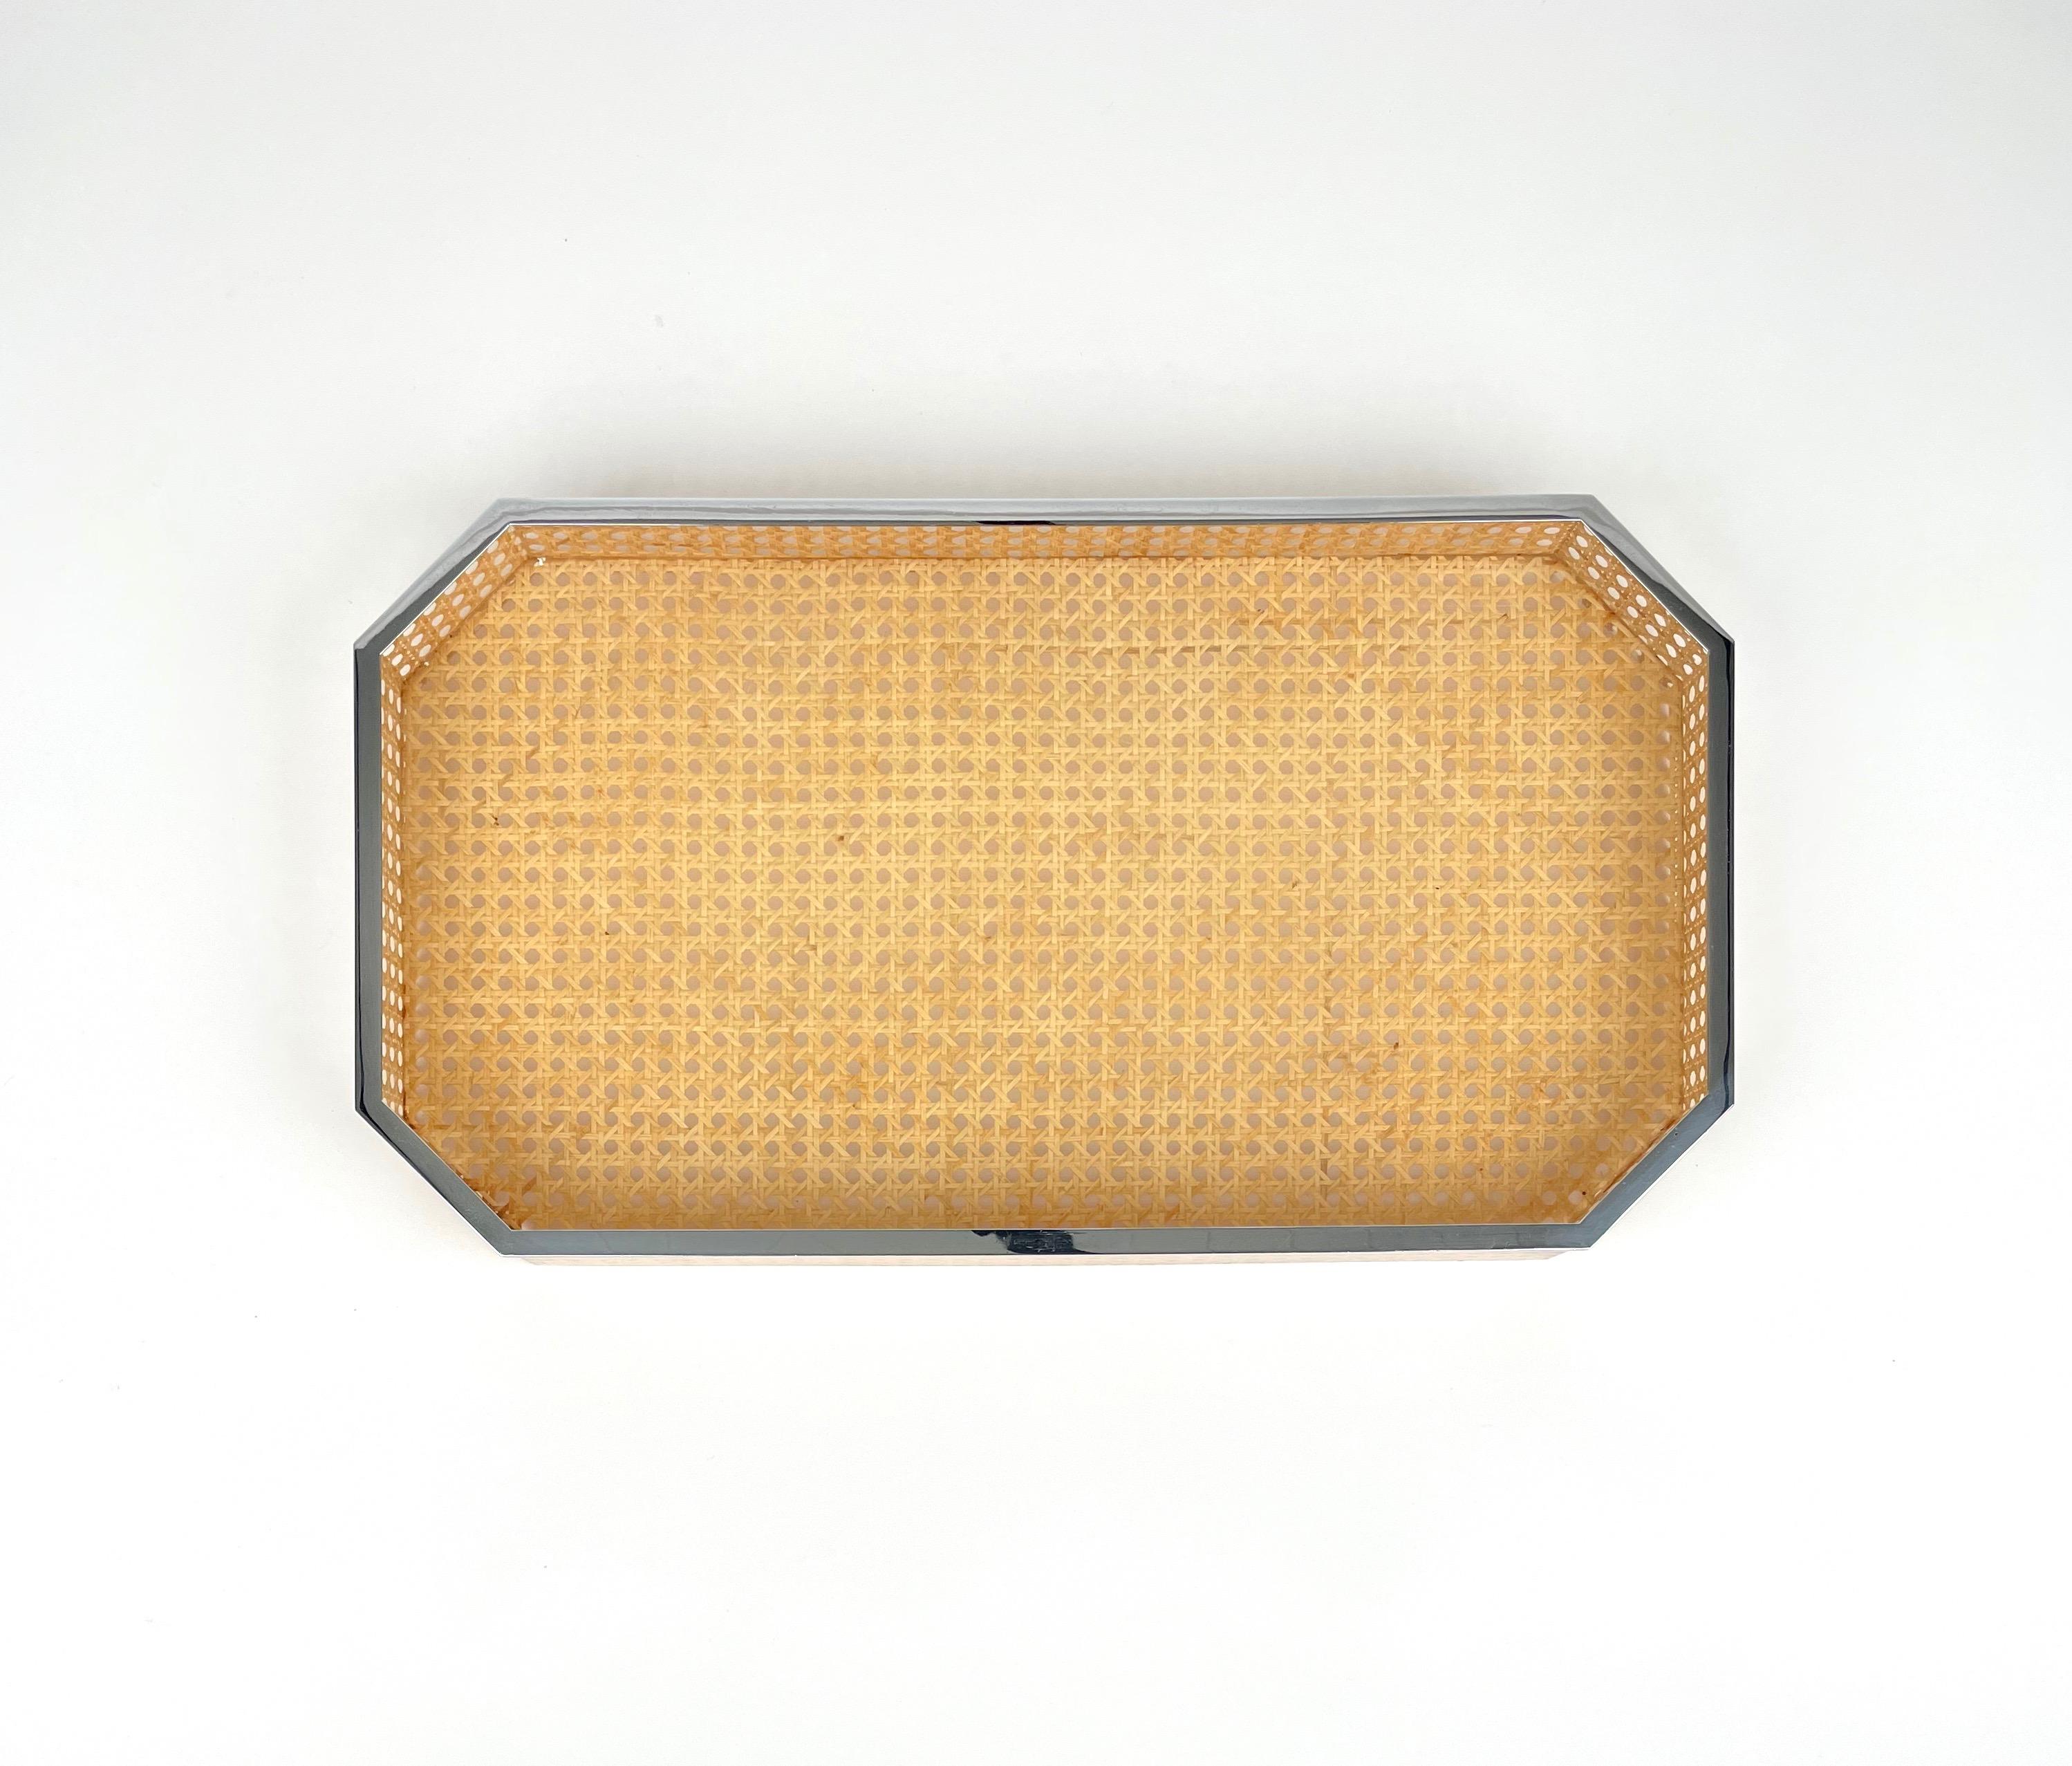 Centerpiece Tray Lucite, Rattan & Chrome Christian Dior Style, Italy, 1970s 2